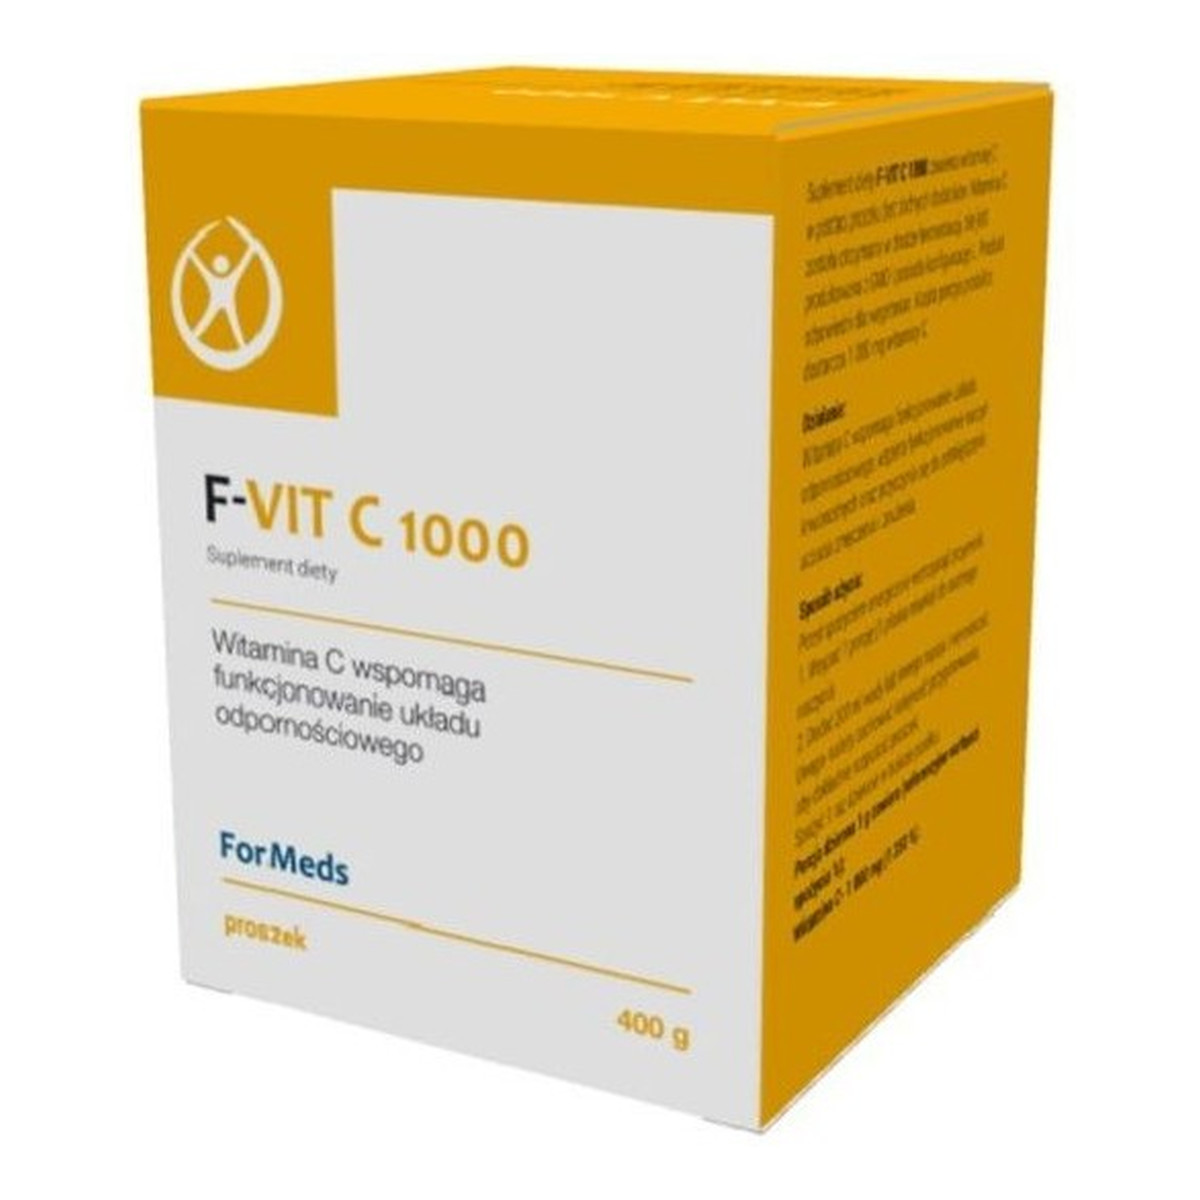 Formeds F-Vit C 1000 Suplement Diety